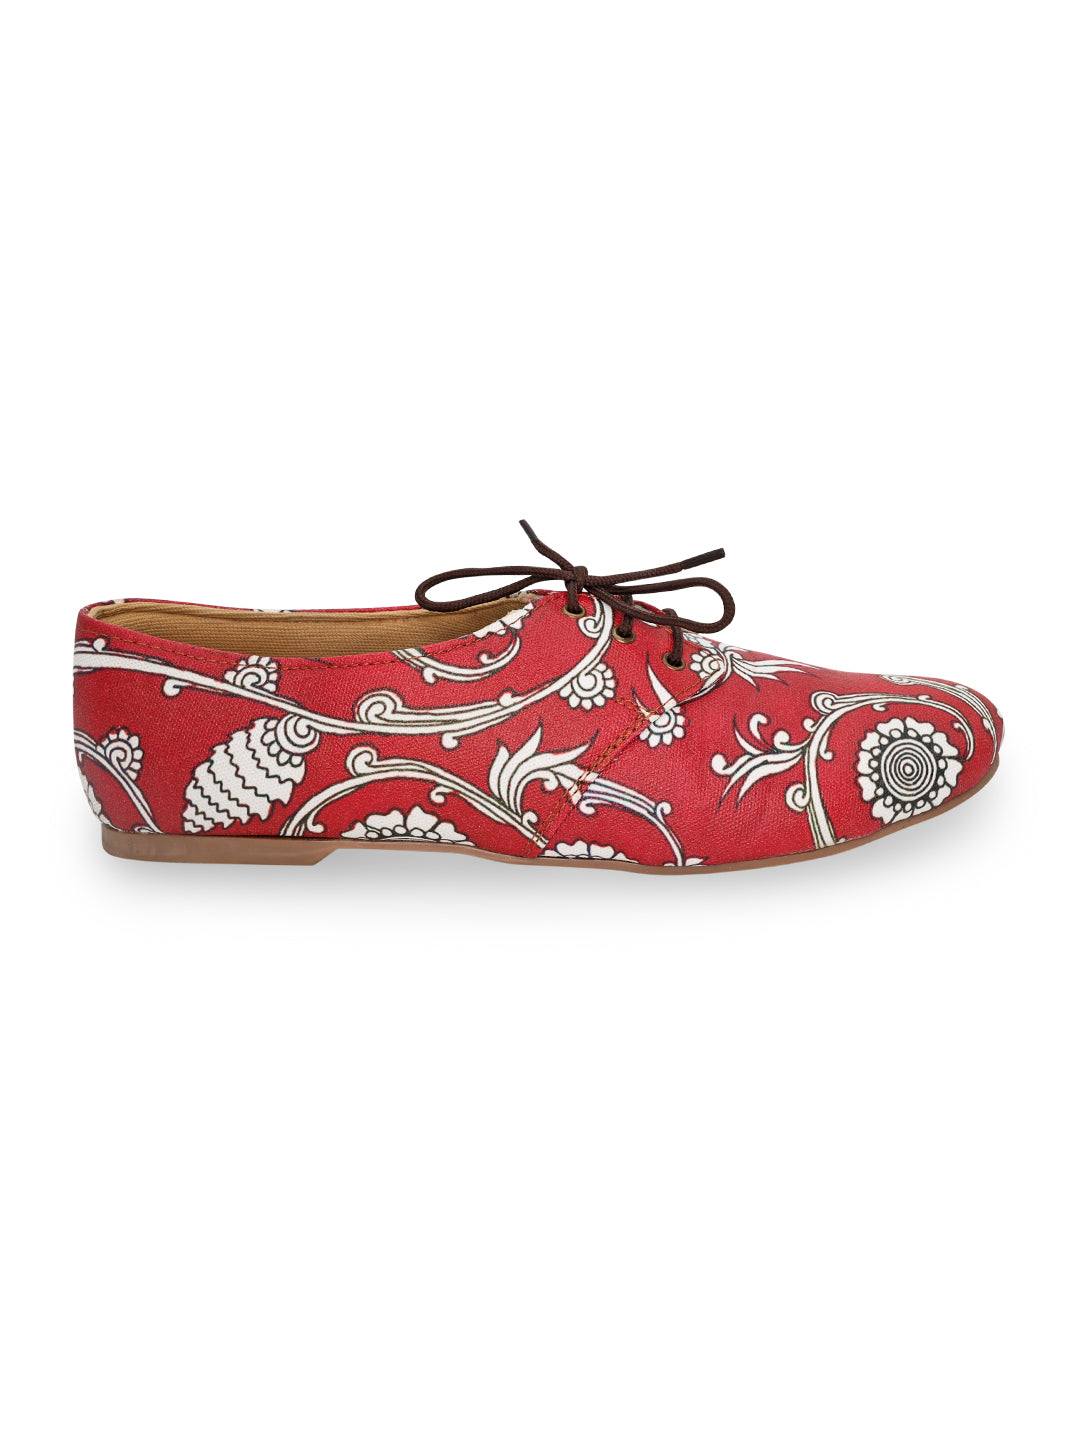 Electric Red Raga Oxfords